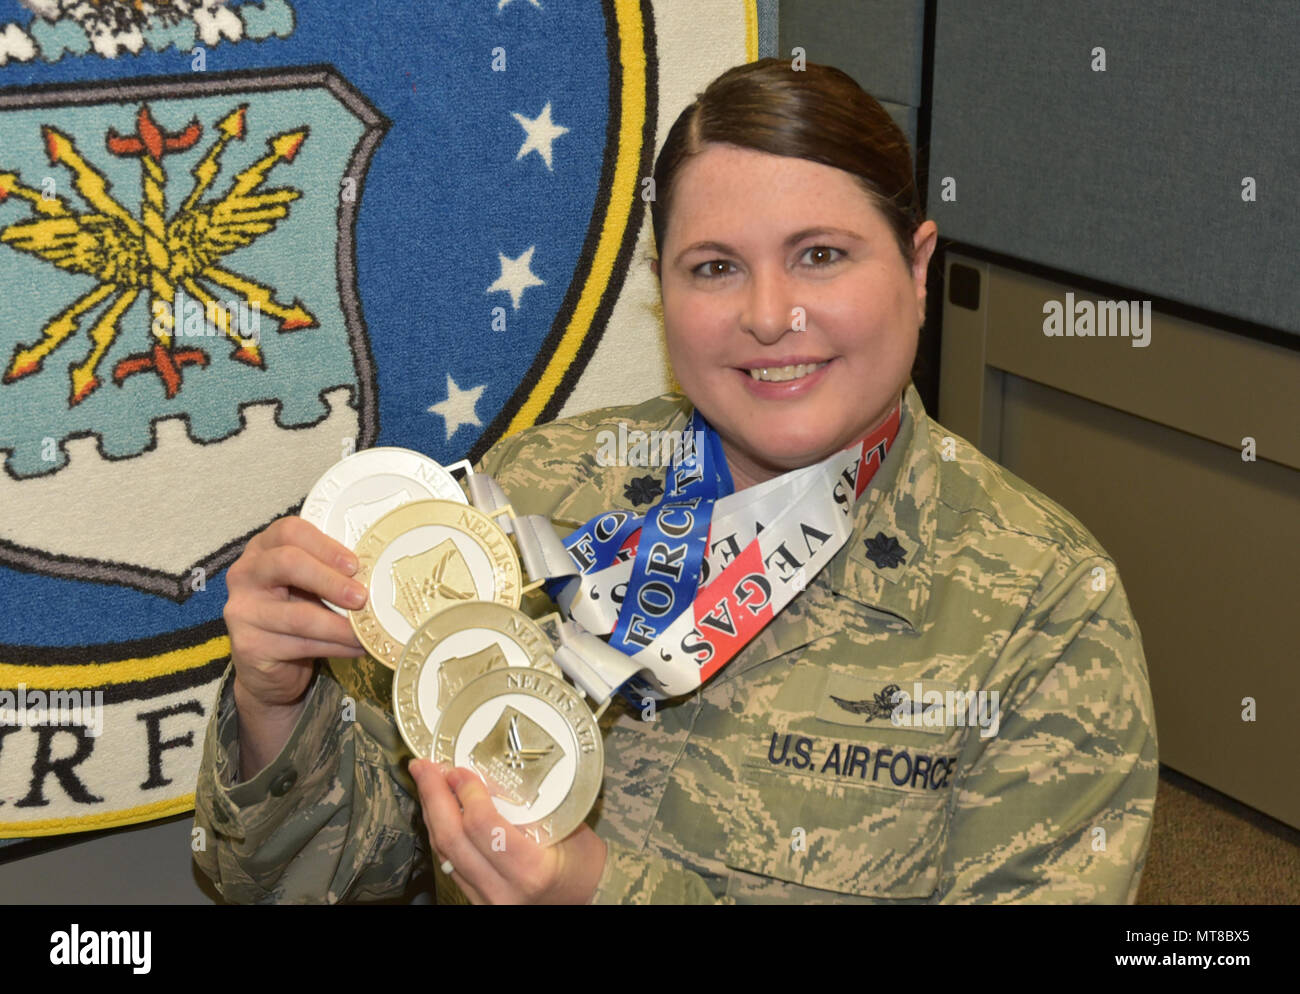 Lt. Col. Jackie Burns, 552nd Air Control Group, 552nd Air Control Wing, displays the medals she earned at the Wounded Warrior Trials at Nellis Air Force Base, Nev., Feb. 17. Burns earned Silver Medals in 5K cycling, 100-meter free style, discus and a Bronze Medal in the 50-meter backstroke. Burns was selected as a primary Wounded Warrior team member and will compete in the Warrior Games June 30-July 8 in Chicago.  (Air Force photo by Ron Mullan) Stock Photo